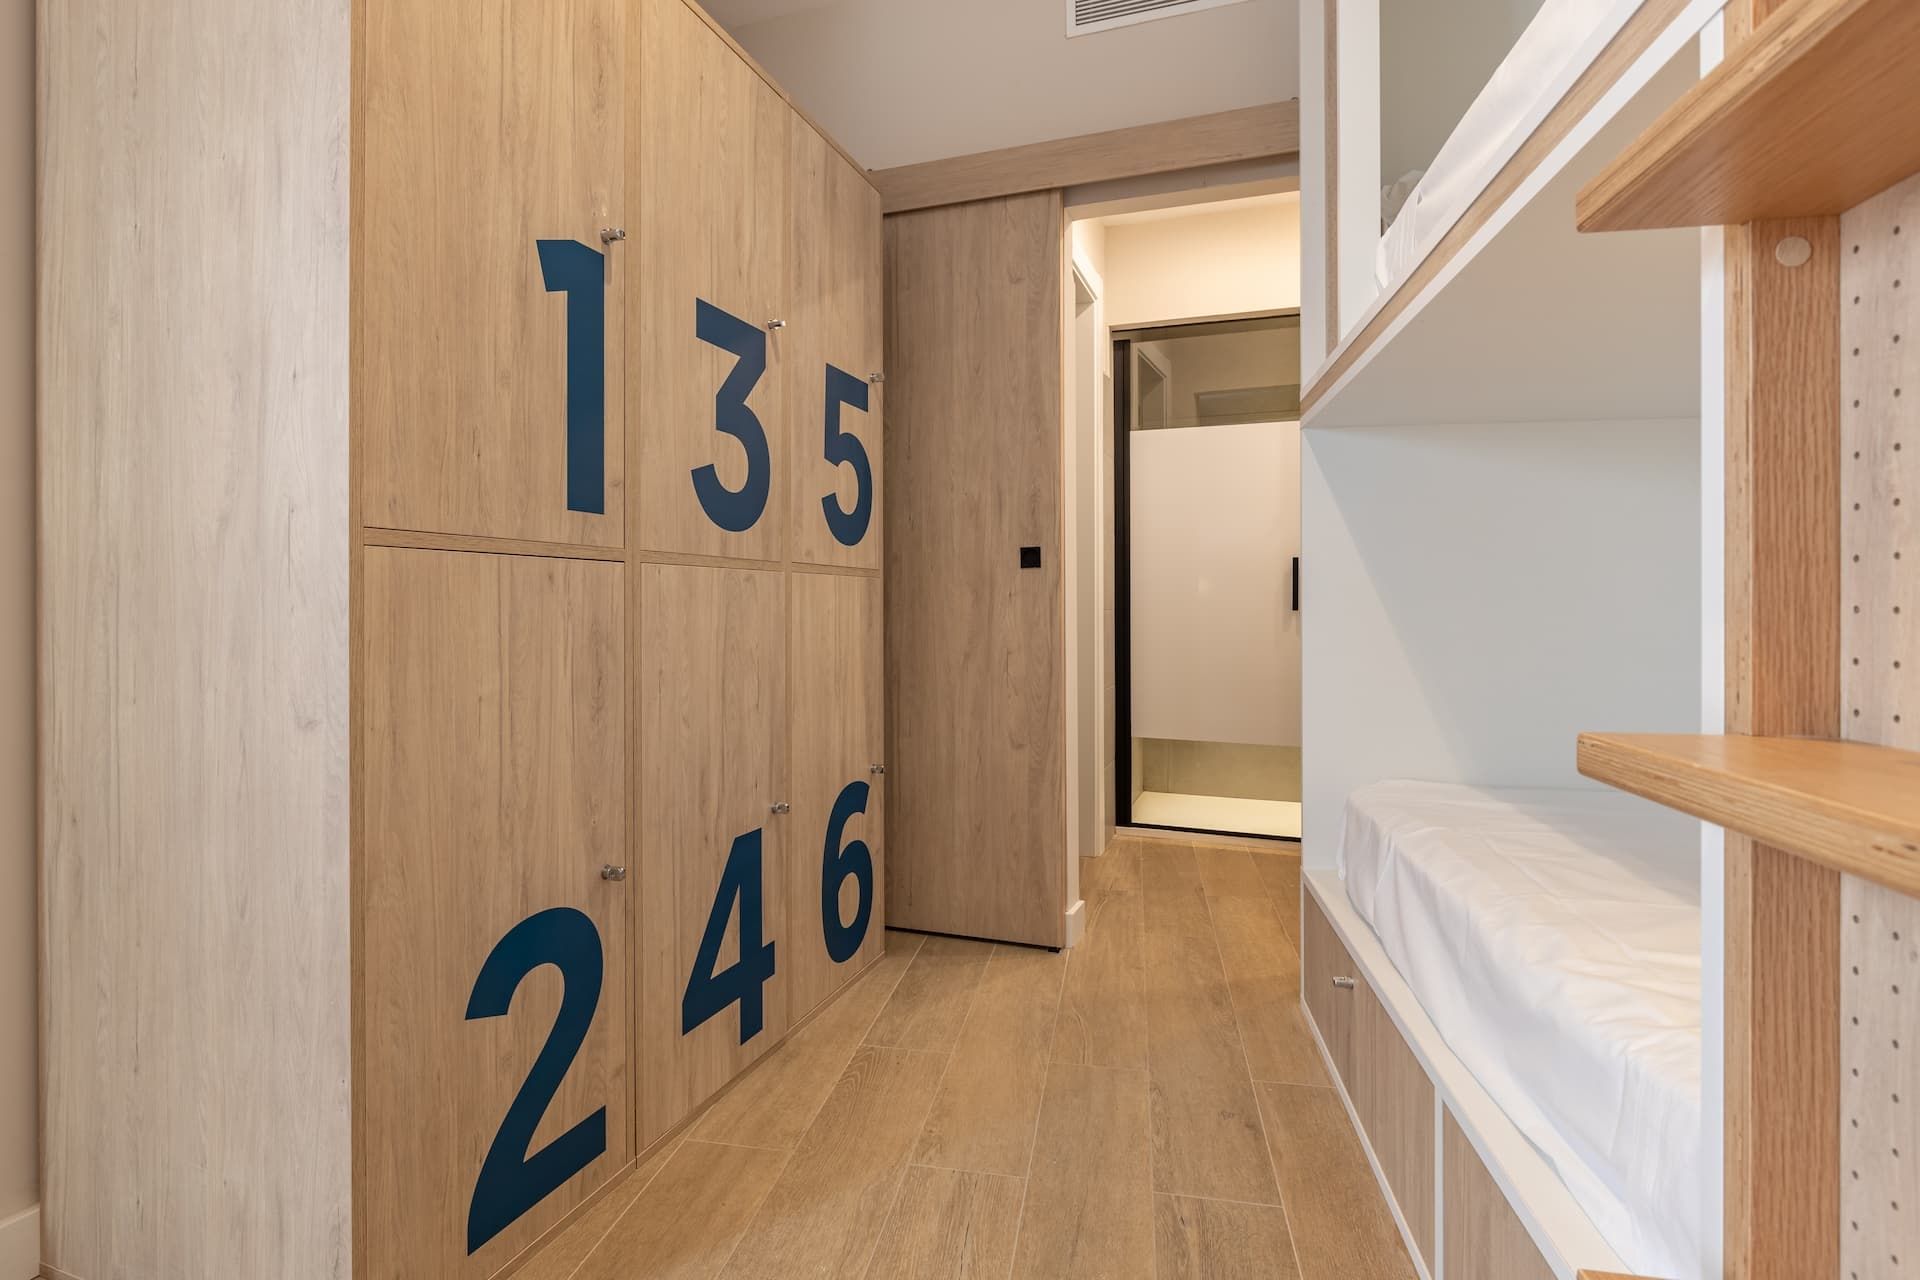 Room for 6 with private bathroom